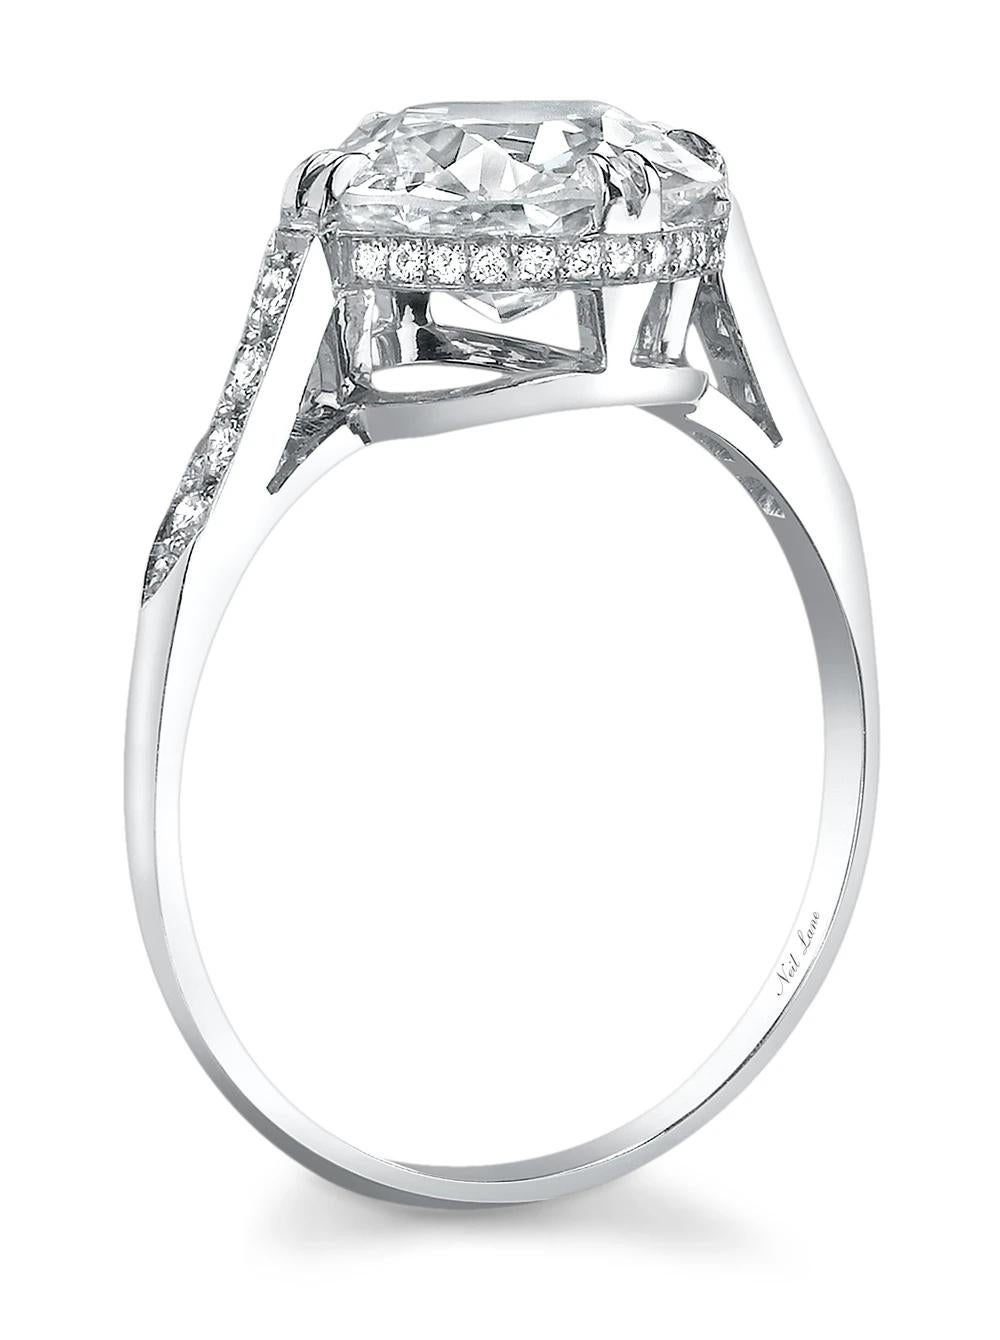 Elegantly set in platinum, the ring centers upon one round brilliant-cut diamond weighing 3.01 cts., accented throughout the gallery and shoulders by thirty-eight round-cut diamonds weighing 0.14 ct., handmade in platinum. stating H Color & VS2